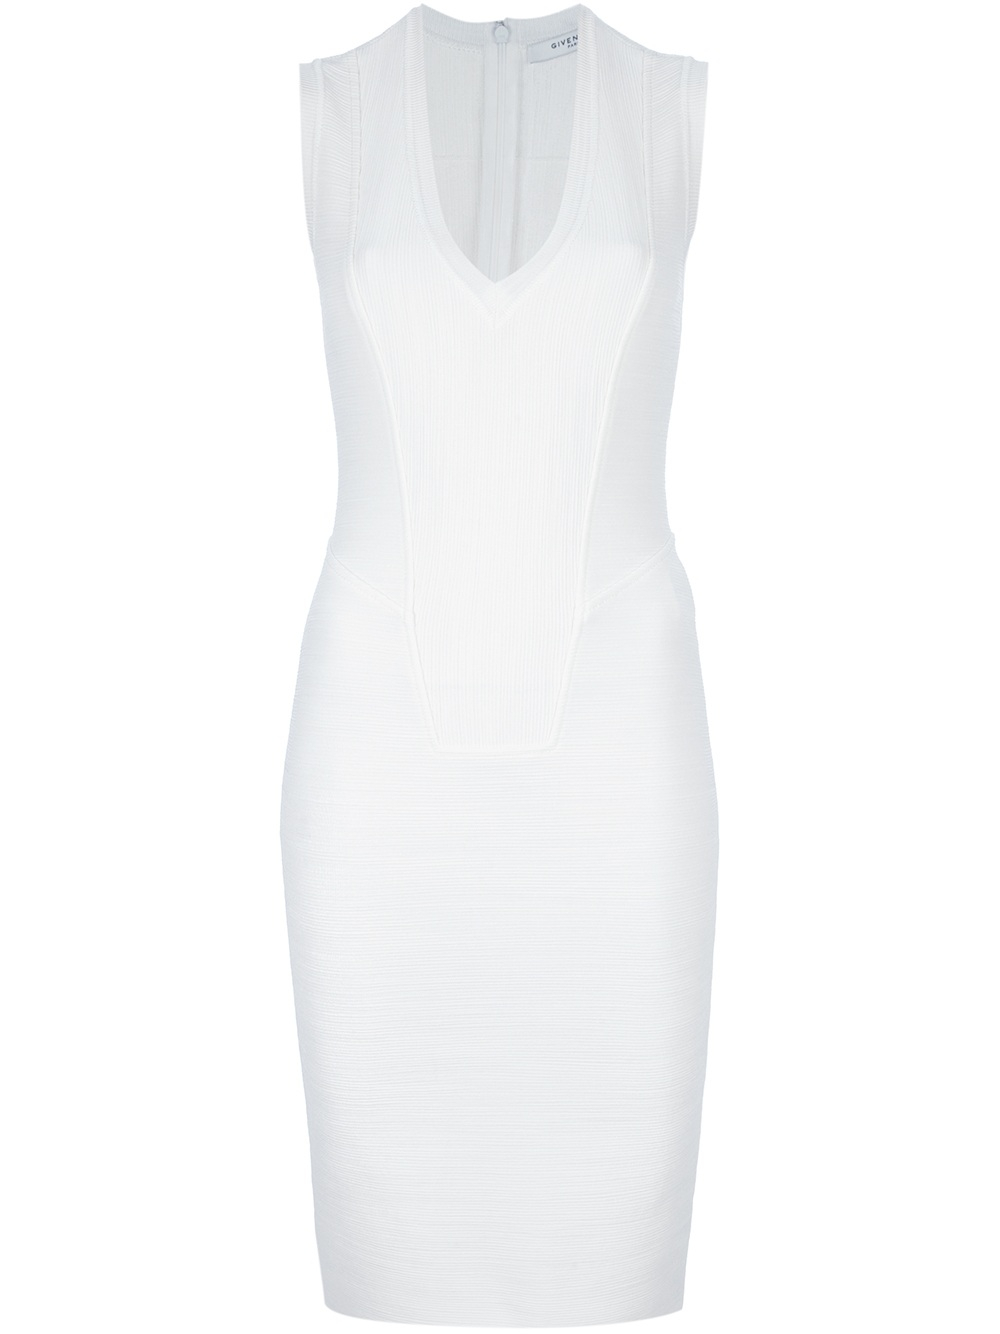 Givenchy Ribbed Bodycon Dress in White - Lyst